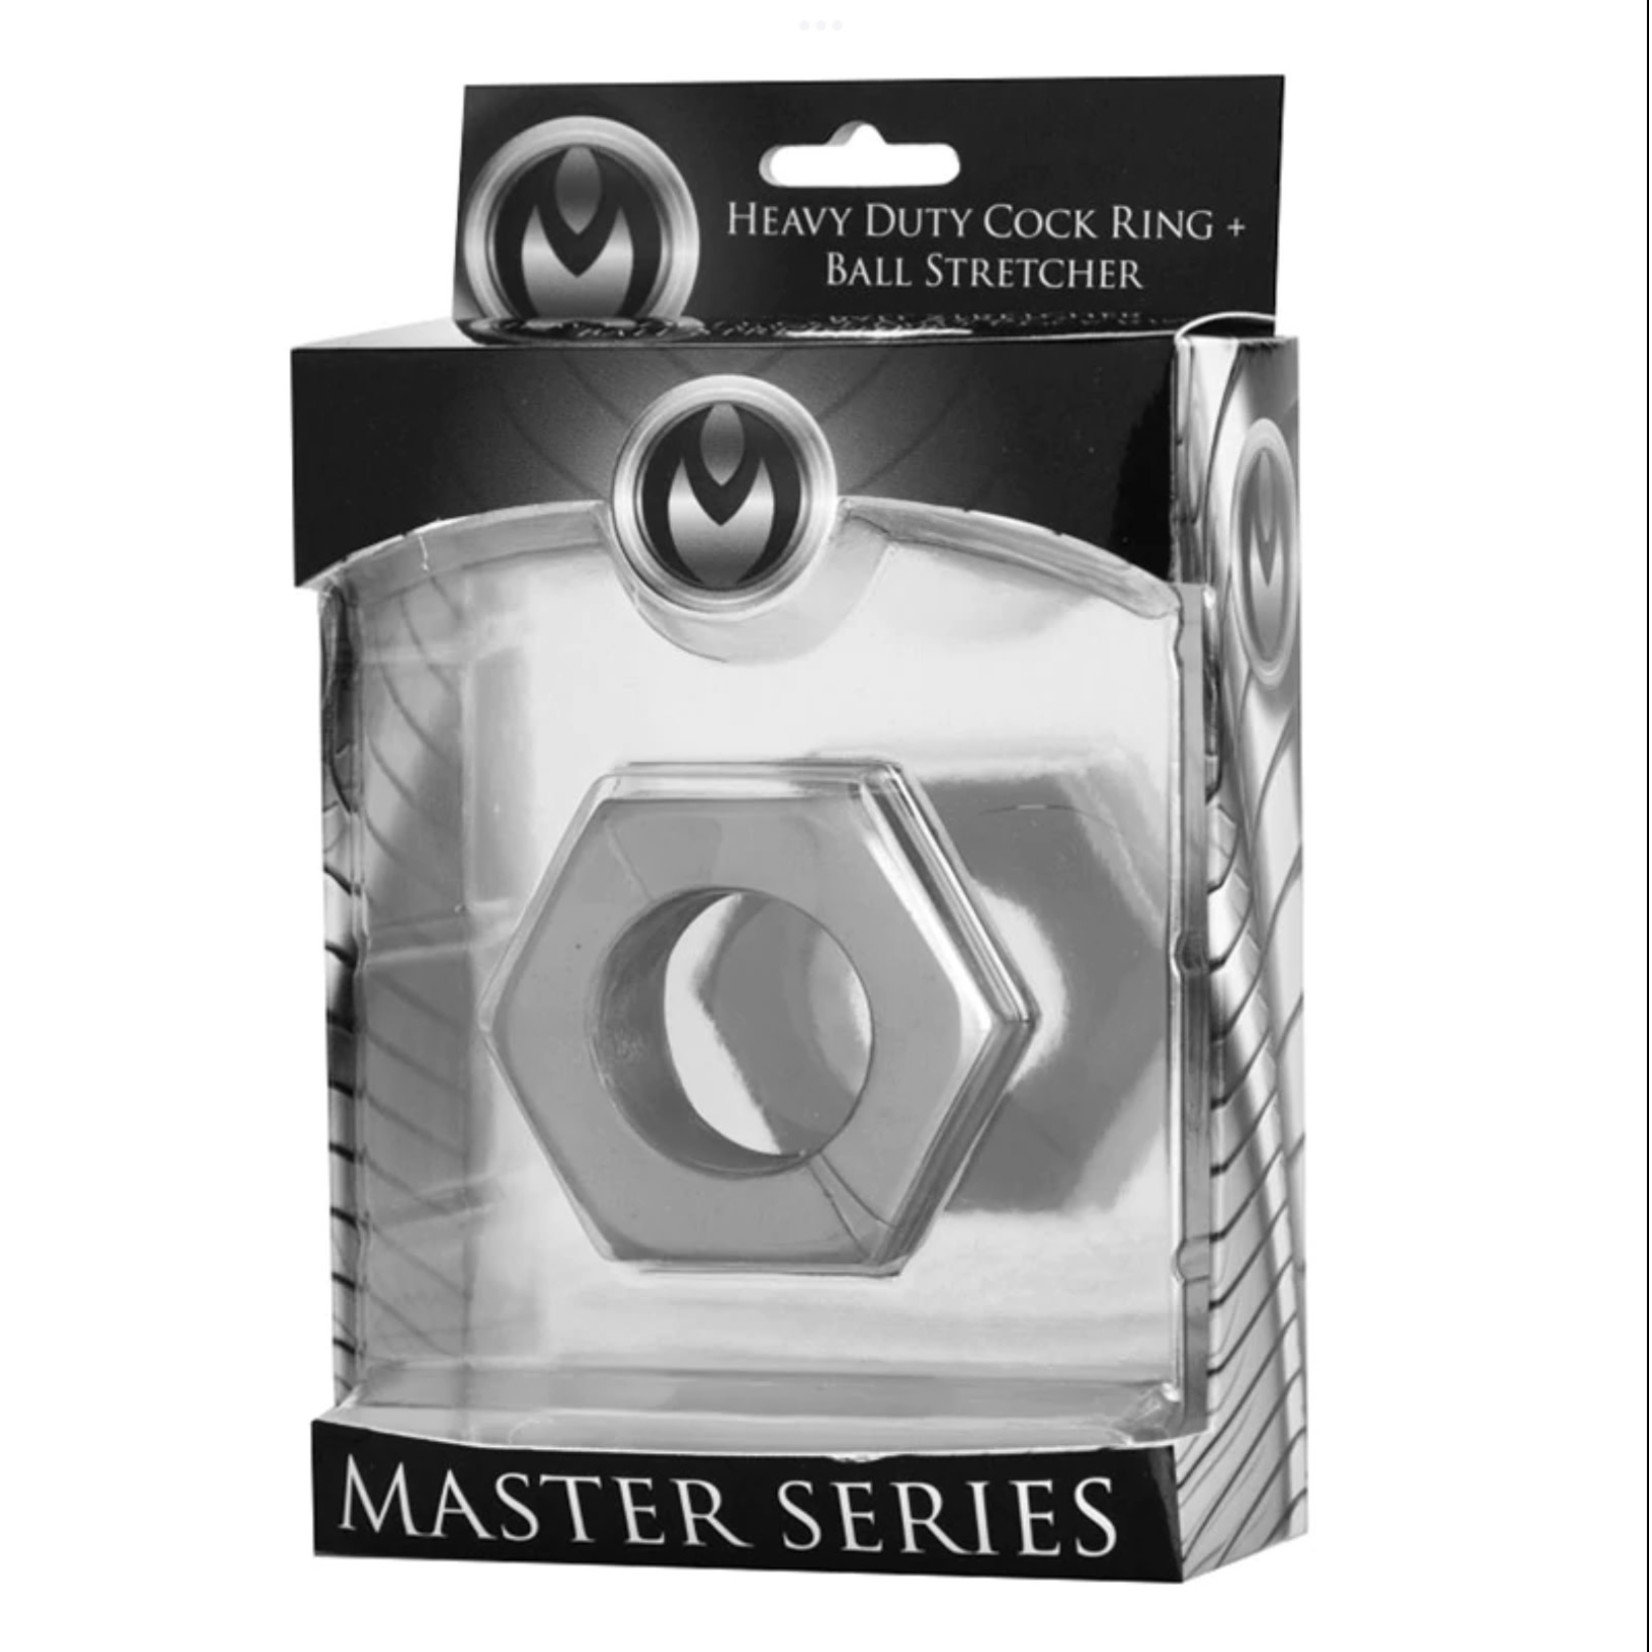 Master Series Master Series Hex Heavy Duty Cock Ring/Ball Stretcher